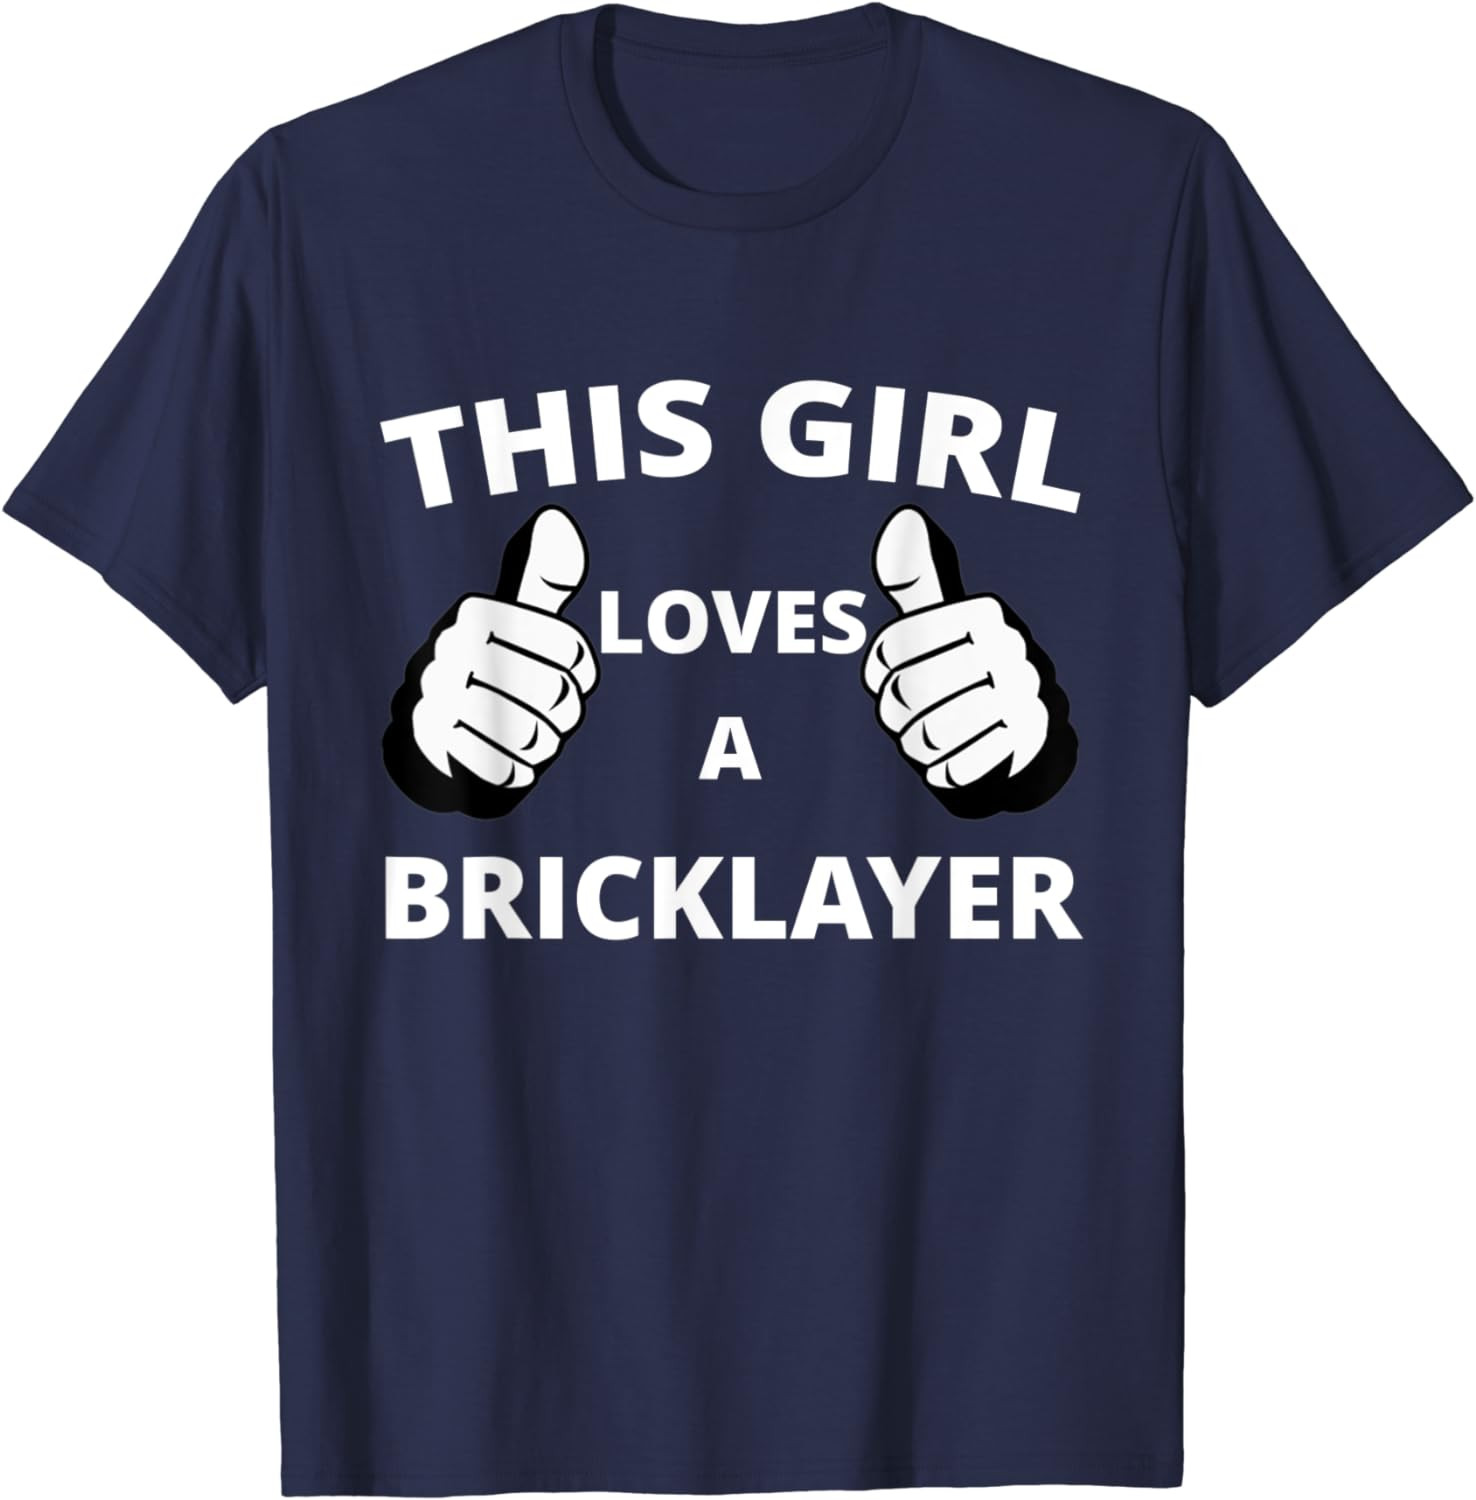 This Girl Loves A Bricklayer T-Shirt